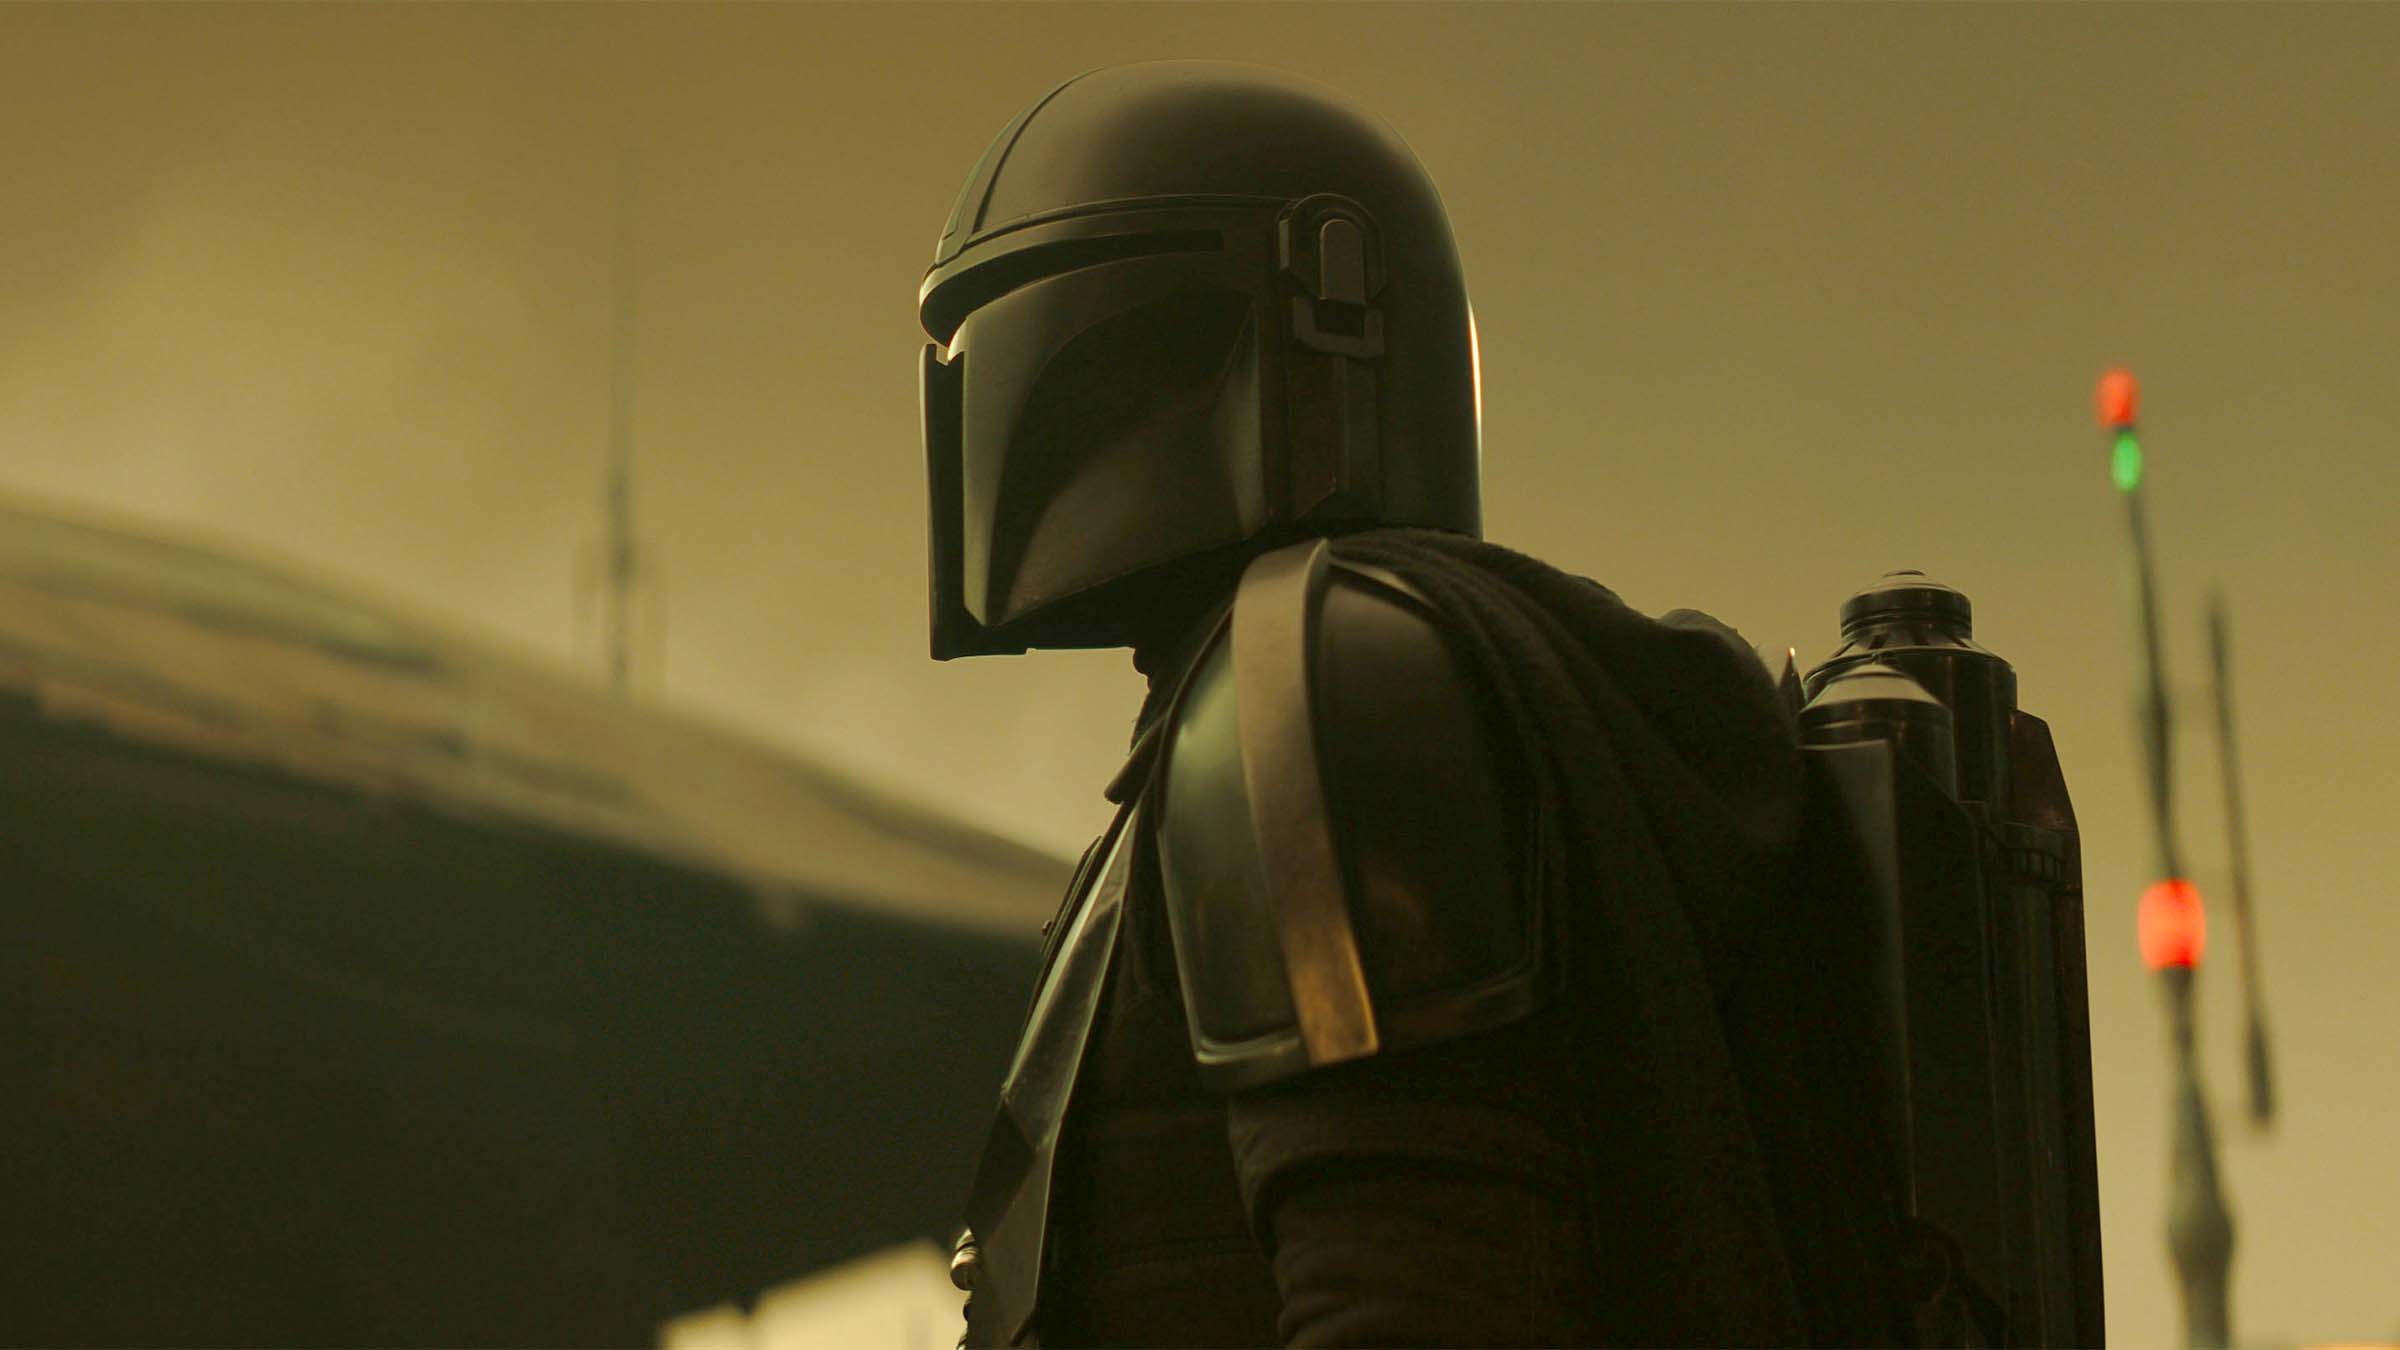 Art of the Cut: Taking “The Mandalorian” to New Heights